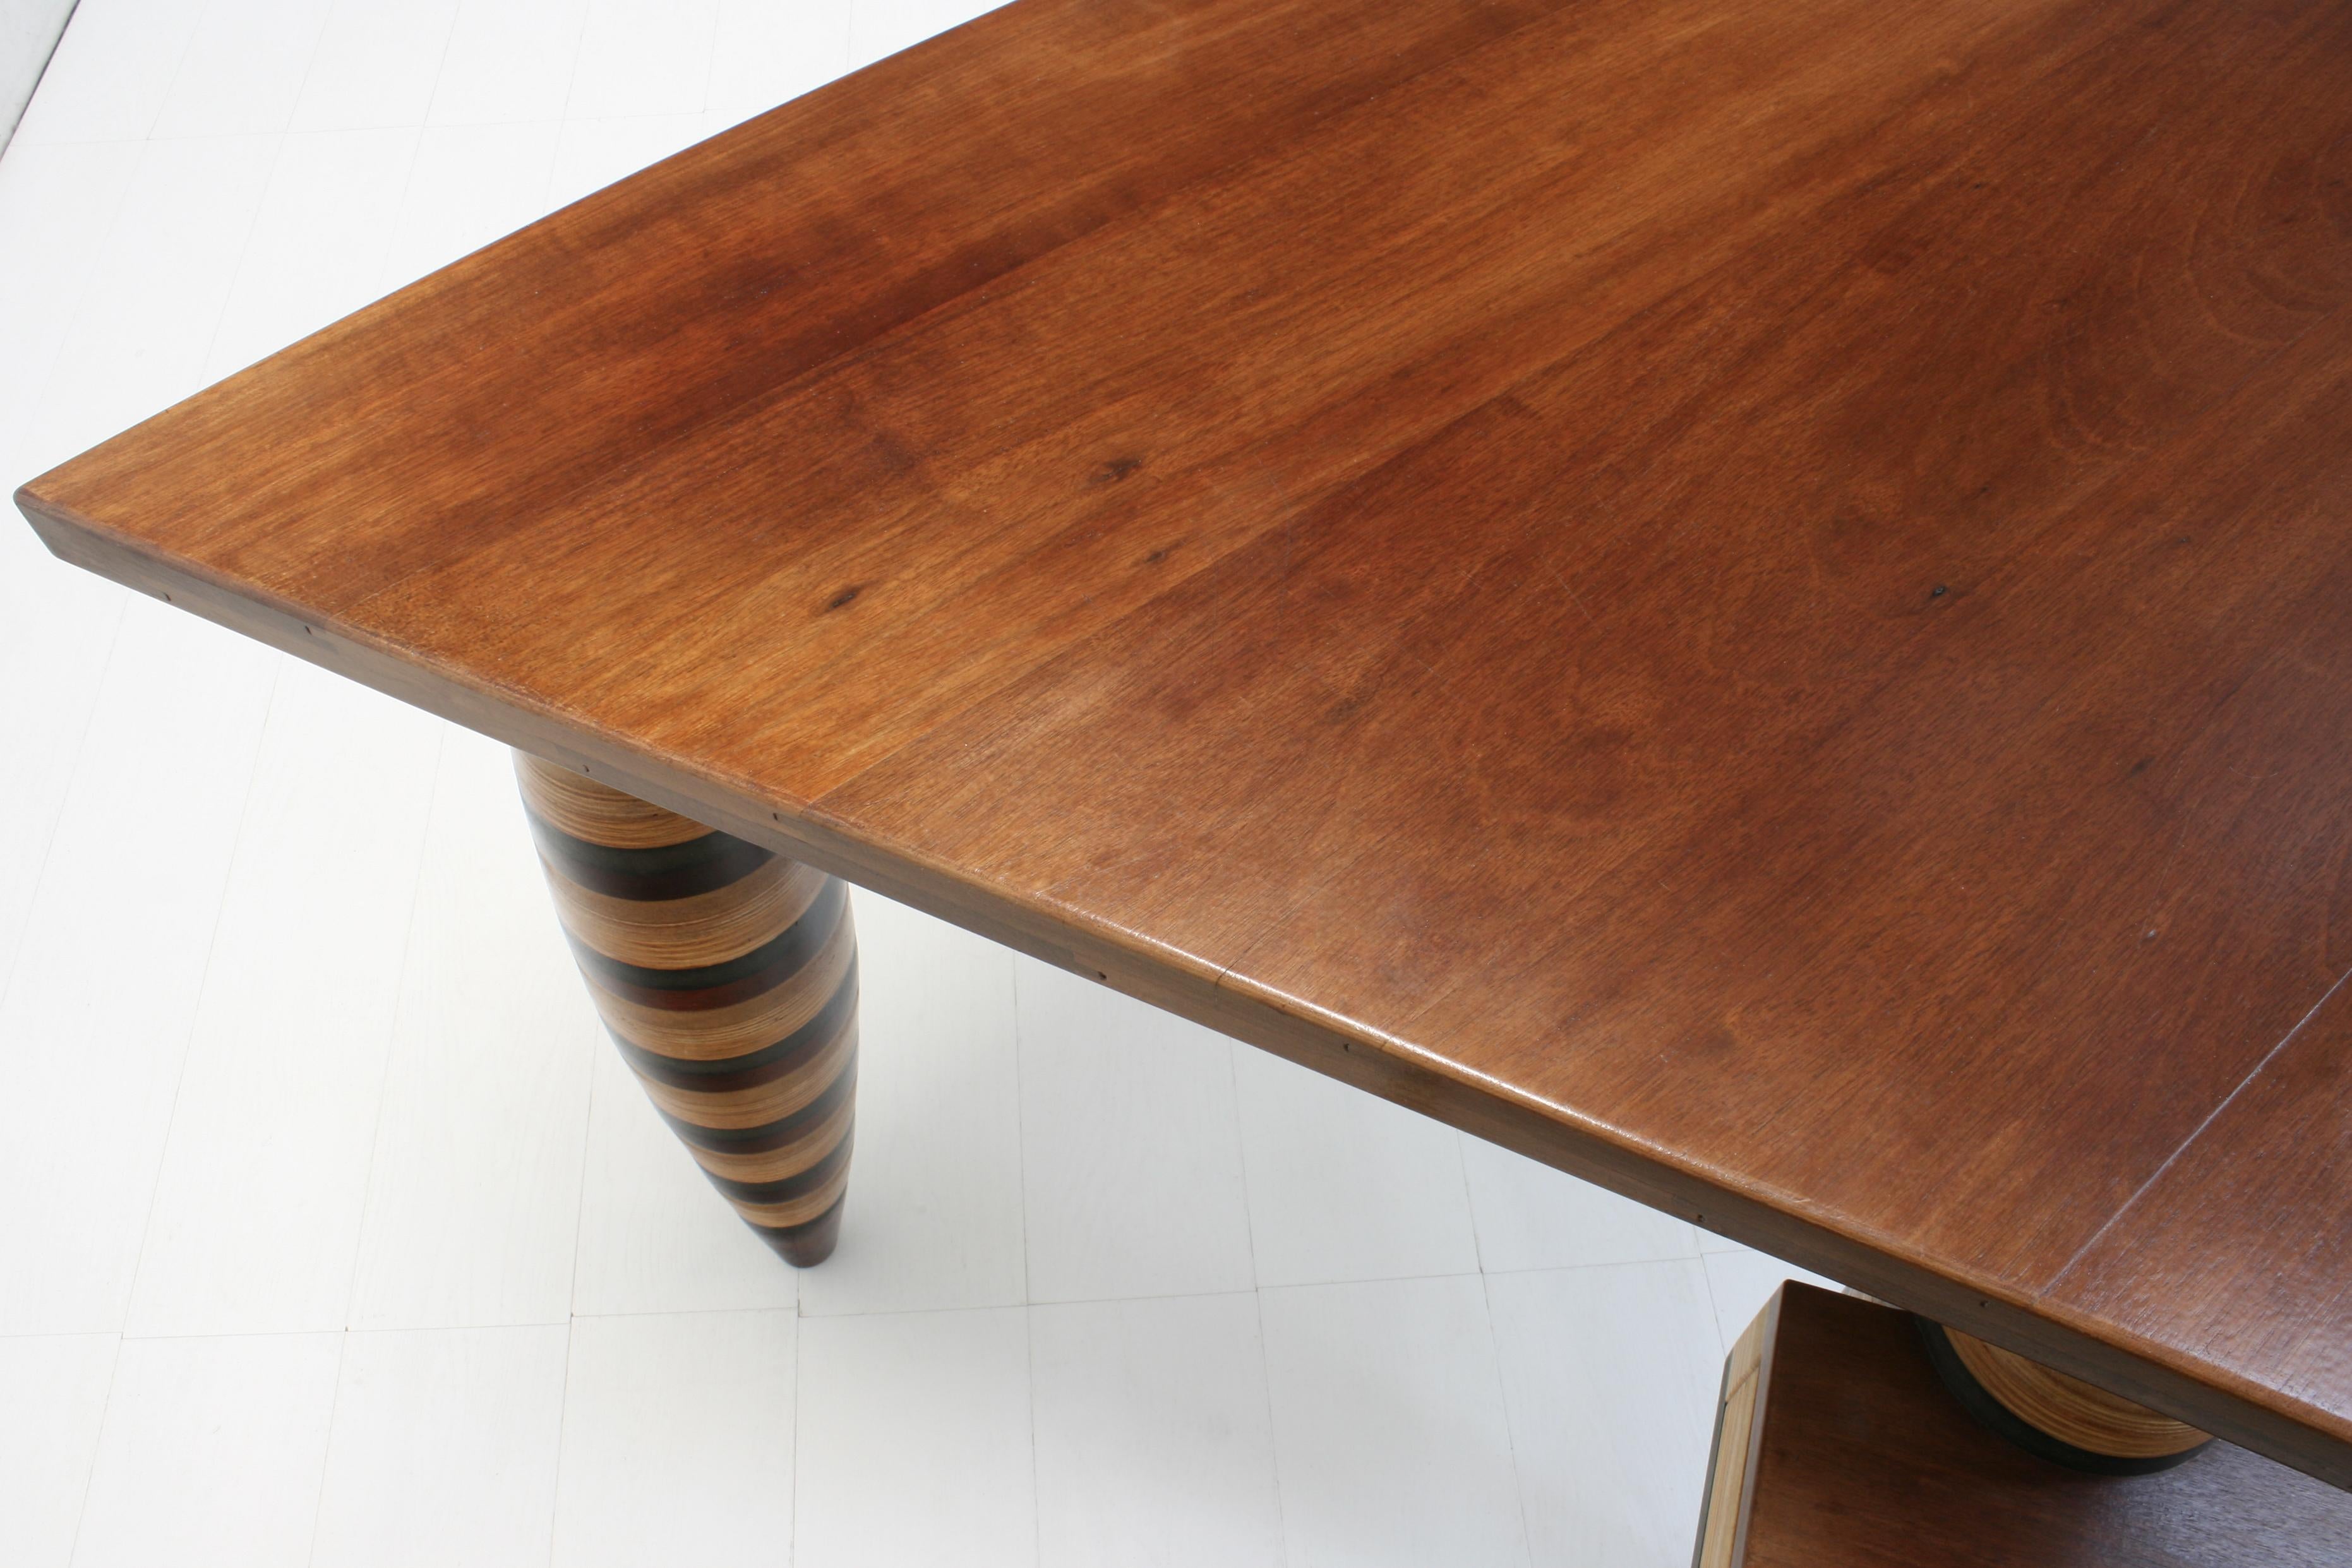 20th Century Most Unique Handcrafted Organic 3-Legged Laminated Cherry Wood Desk For Sale